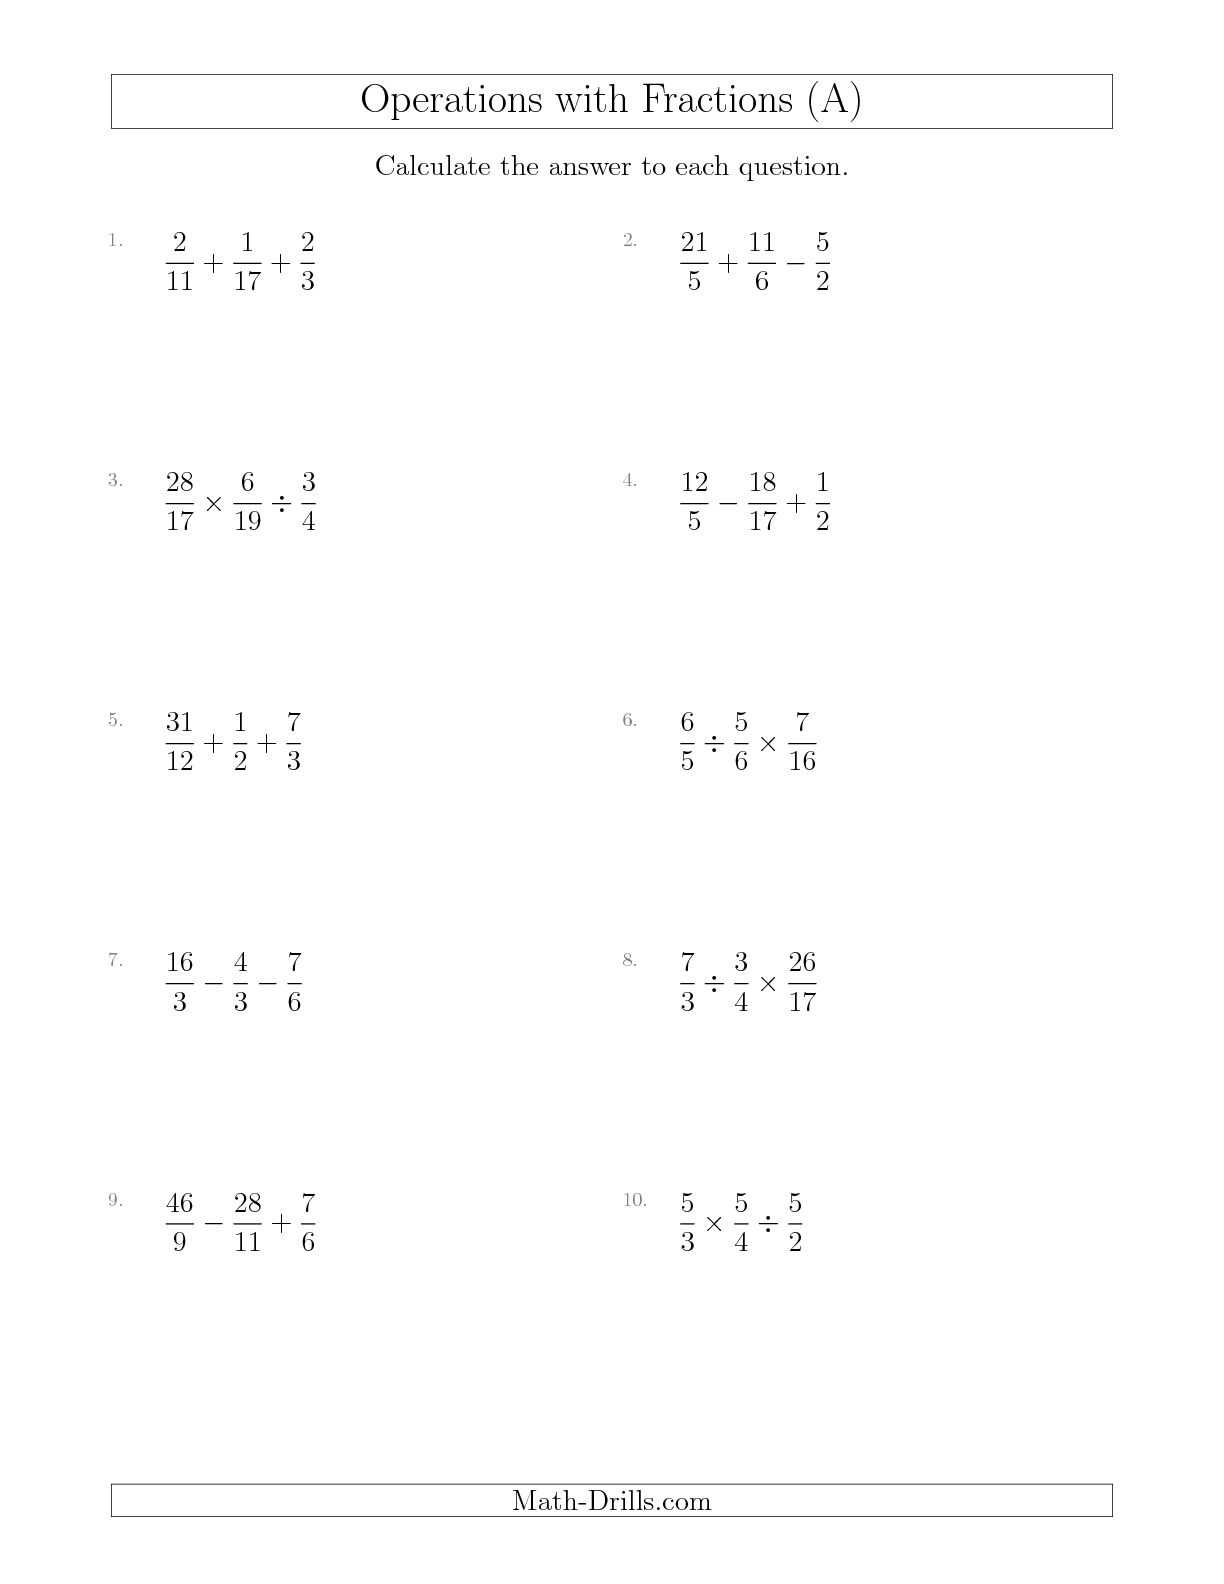 Unit Conversion Worksheet Pdf and Fractions Convert Improper Fraction Changing Mixed Number to An